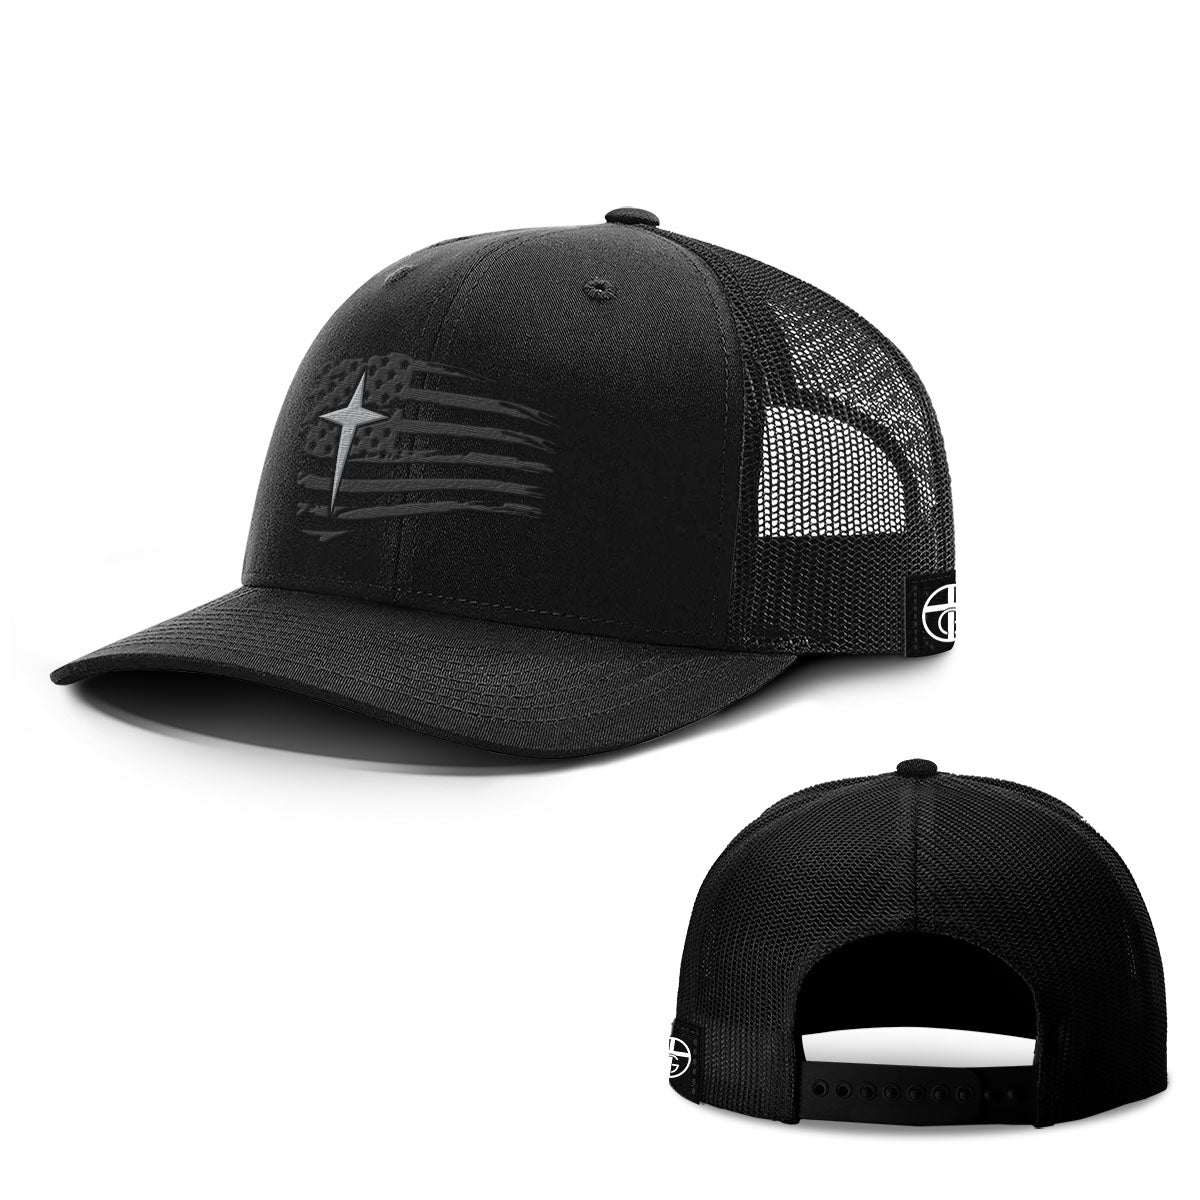 Blackout Flag Special Edition: Light in the Darkness Hats